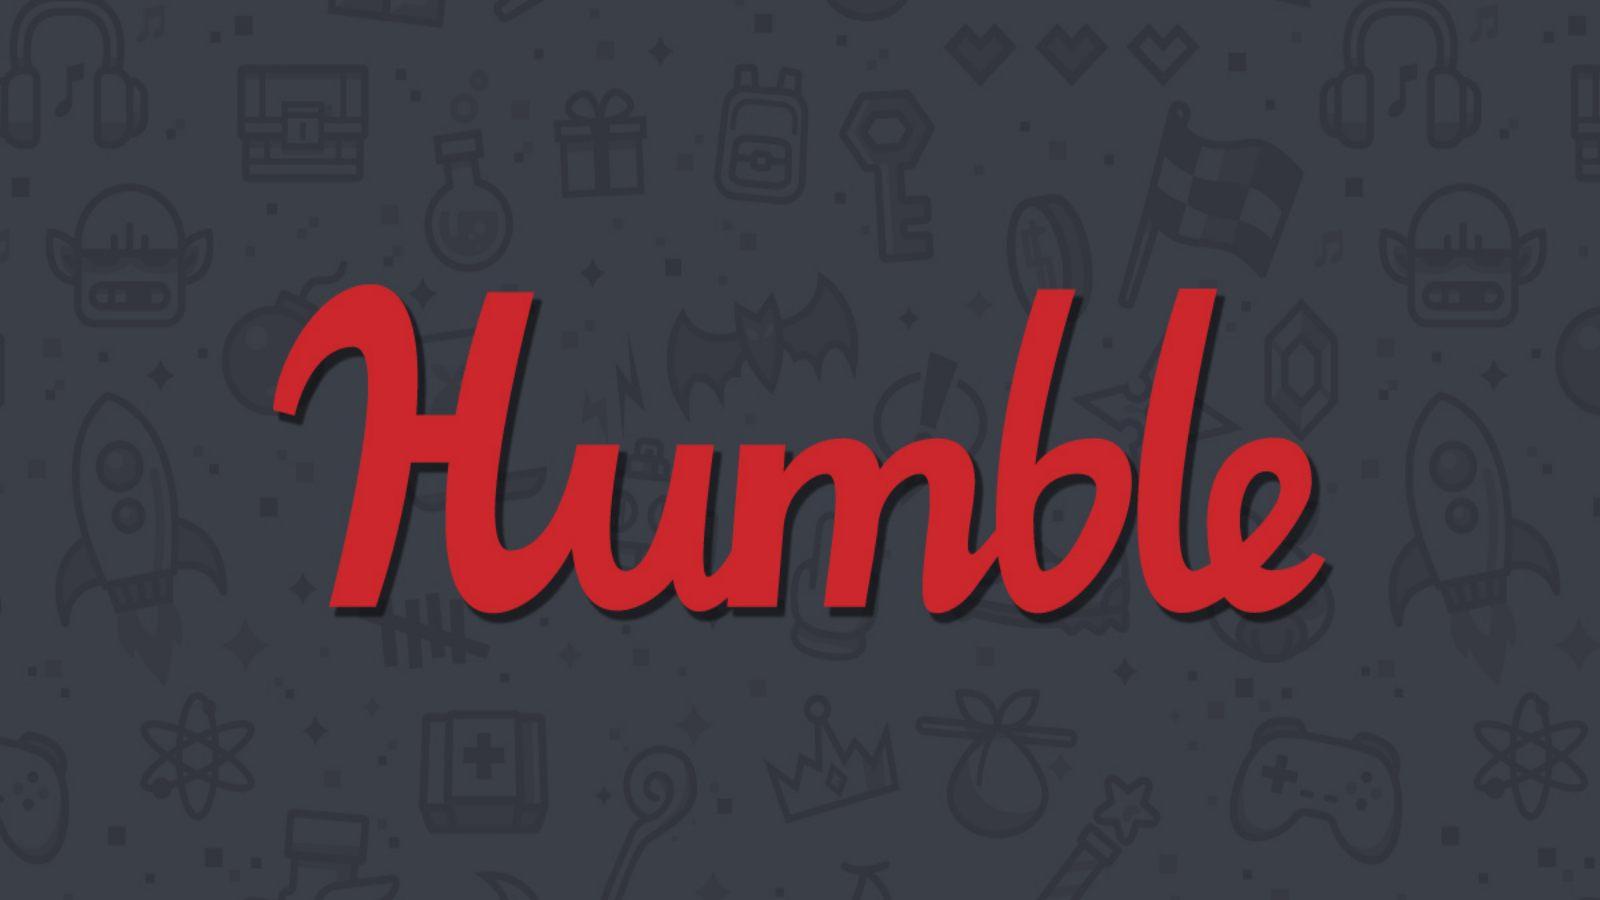 Paizo News: Humble Bundle Extended and New Releases